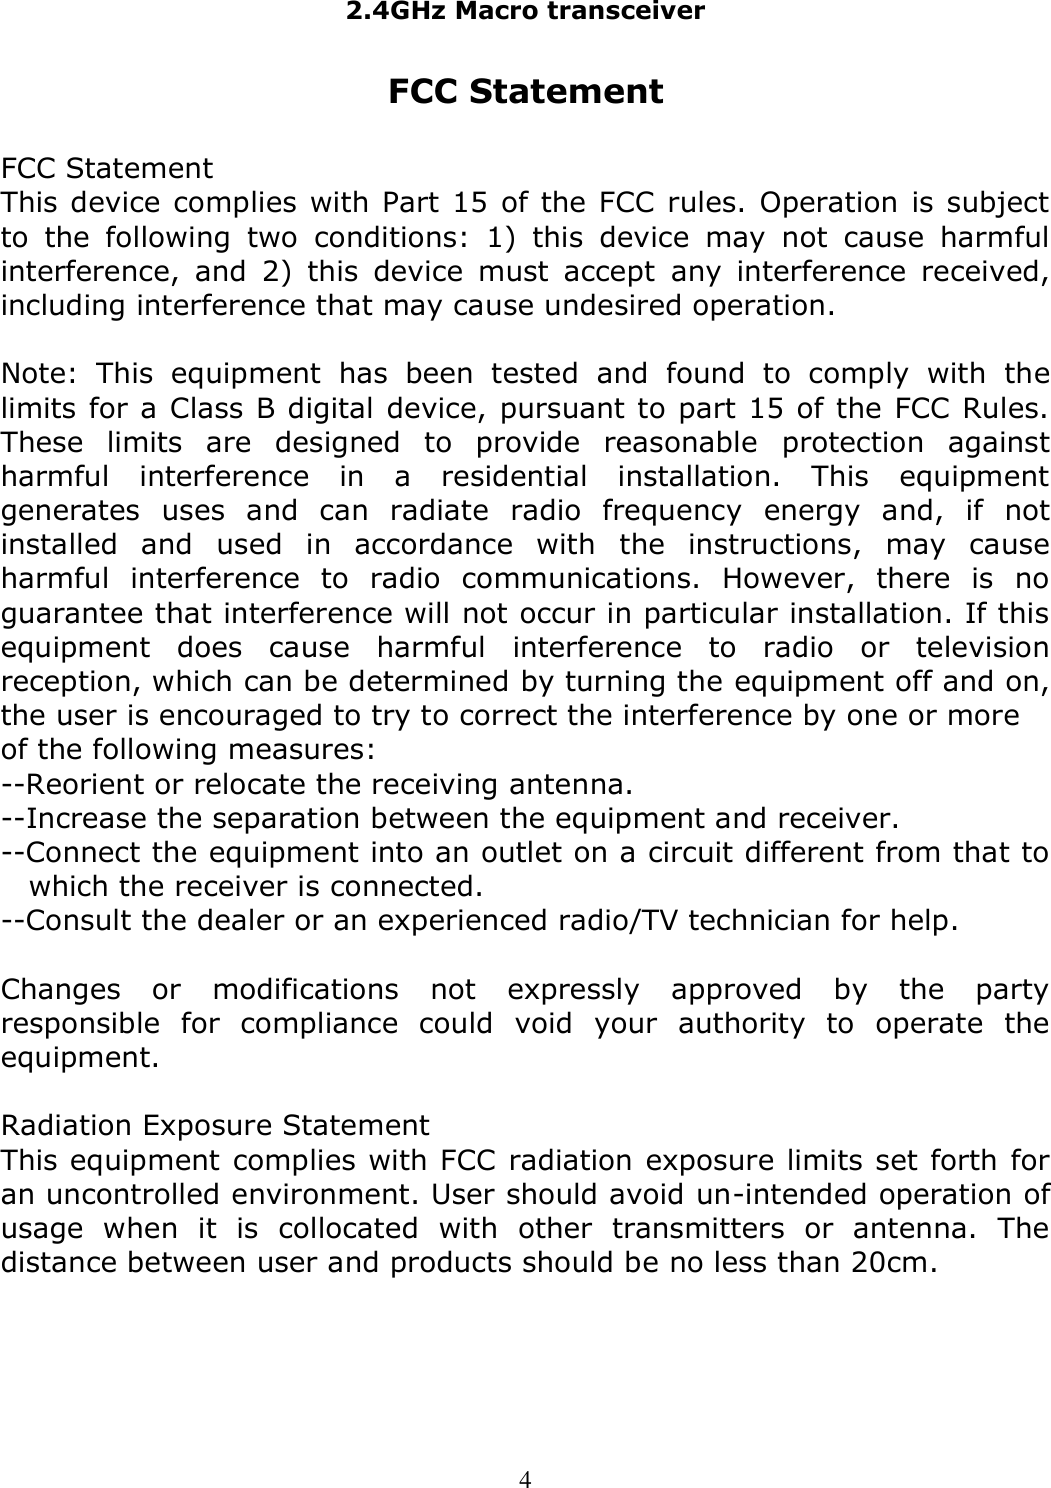 2.4GHz Macro transceiver   4 FCC Statement  FCC Statement  This device complies with Part 15 of the FCC rules. Operation is subject to  the  following  two  conditions:  1)  this  device  may  not  cause  harmful interference,  and  2)  this  device  must  accept  any  interference  received, including interference that may cause undesired operation.  Note:  This  equipment  has  been  tested  and  found  to  comply  with  the limits for a Class B digital device, pursuant to part 15 of the FCC Rules. These  limits  are  designed  to  provide  reasonable  protection  against harmful  interference  in  a  residential  installation.  This  equipment generates  uses  and  can  radiate  radio  frequency  energy  and,  if  not installed  and  used  in  accordance  with  the  instructions,  may  cause harmful  interference  to  radio  communications.  However,  there  is  no guarantee that interference will not occur in particular installation. If this equipment  does  cause  harmful  interference  to  radio  or  television reception, which can be determined by turning the equipment off and on, the user is encouraged to try to correct the interference by one or more of the following measures: --Reorient or relocate the receiving antenna. --Increase the separation between the equipment and receiver. --Connect the equipment into an outlet on a circuit different from that to which the receiver is connected. --Consult the dealer or an experienced radio/TV technician for help.  Changes  or  modifications  not  expressly  approved  by  the  party responsible  for  compliance  could  void  your  authority  to  operate  the equipment.  Radiation Exposure Statement This equipment complies with FCC radiation exposure limits set forth for an uncontrolled environment. User should avoid un-intended operation of usage  when  it  is  collocated  with  other  transmitters  or  antenna.  The distance between user and products should be no less than 20cm.  